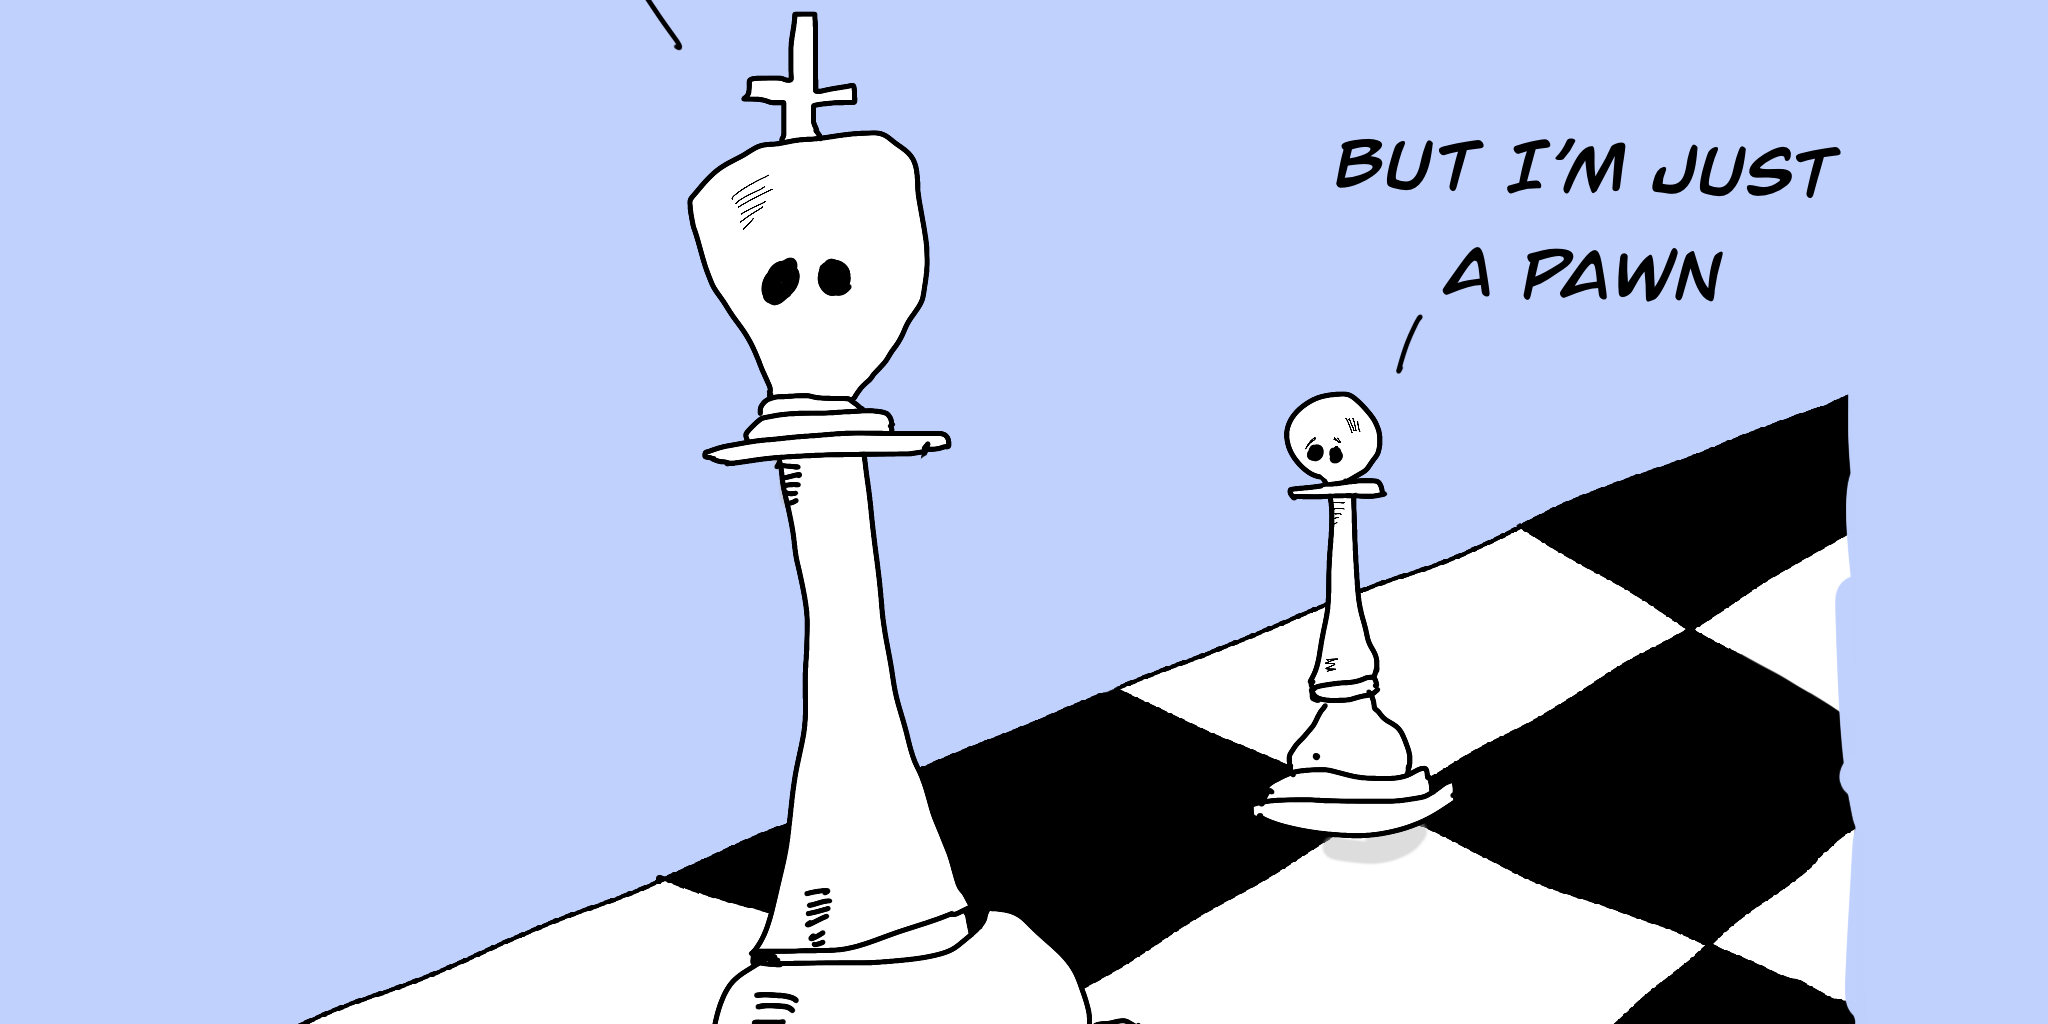 Cartoon of Chess Pieces speaking. King piece says 